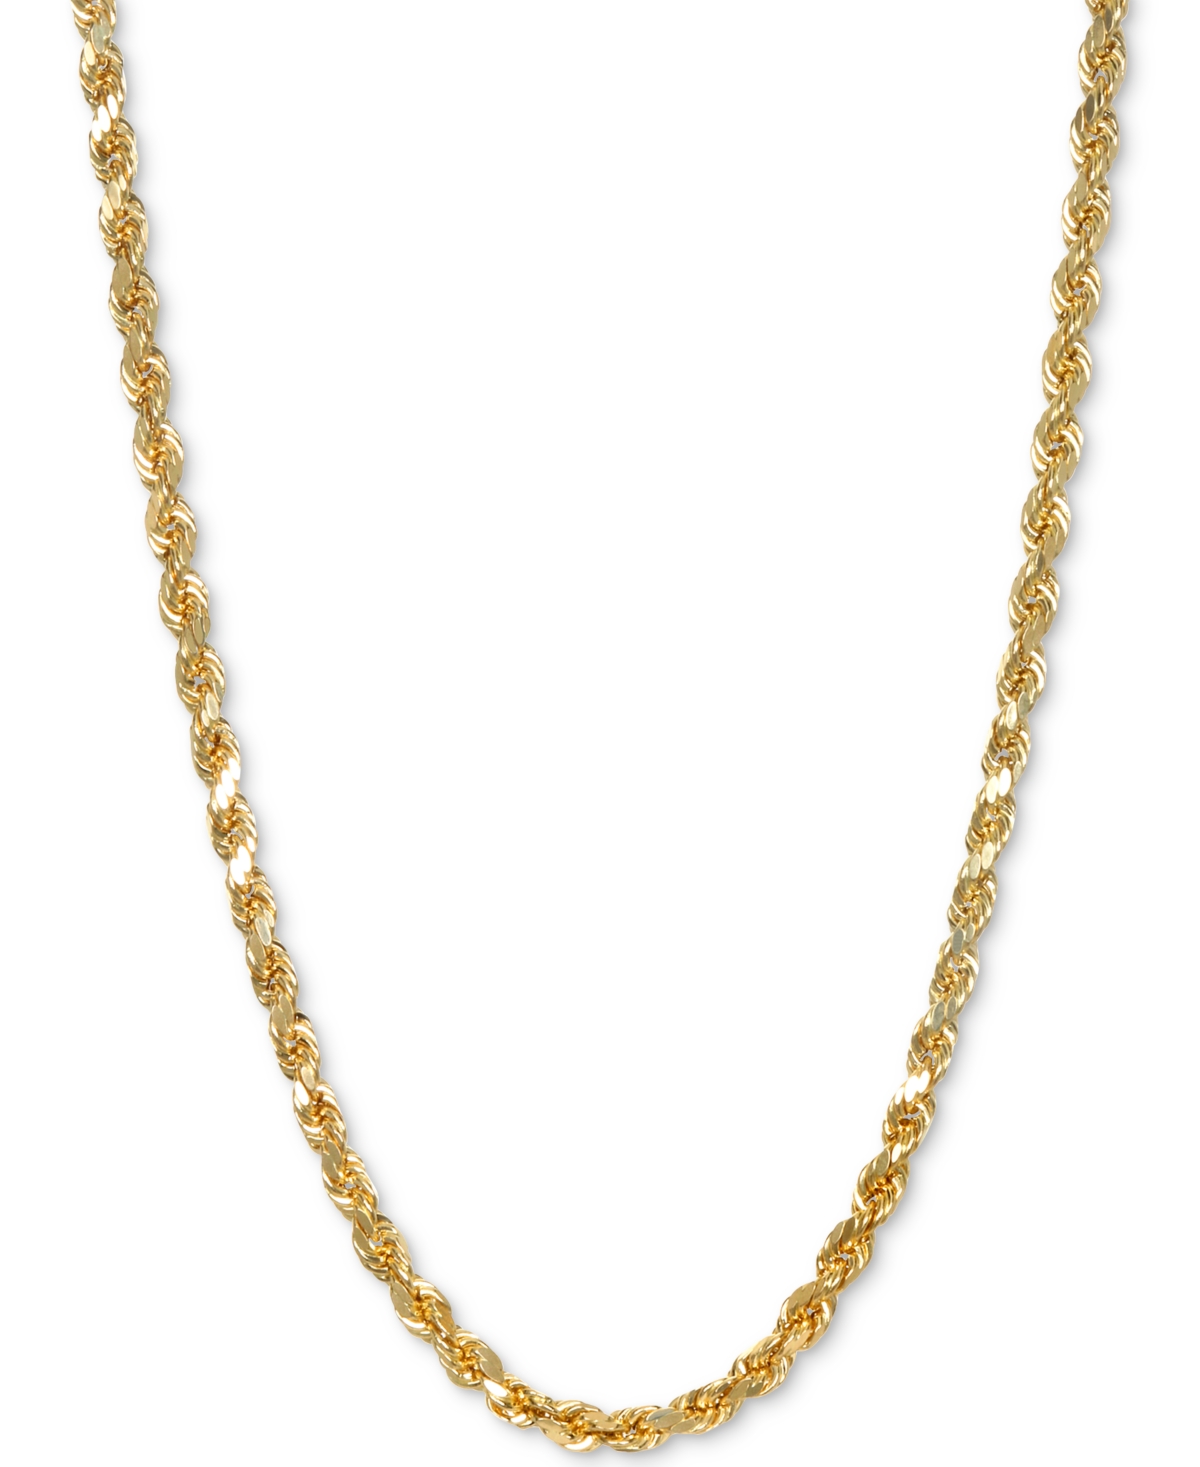 Rope 28" Chain Necklace in 14k Gold - Yellow Gold